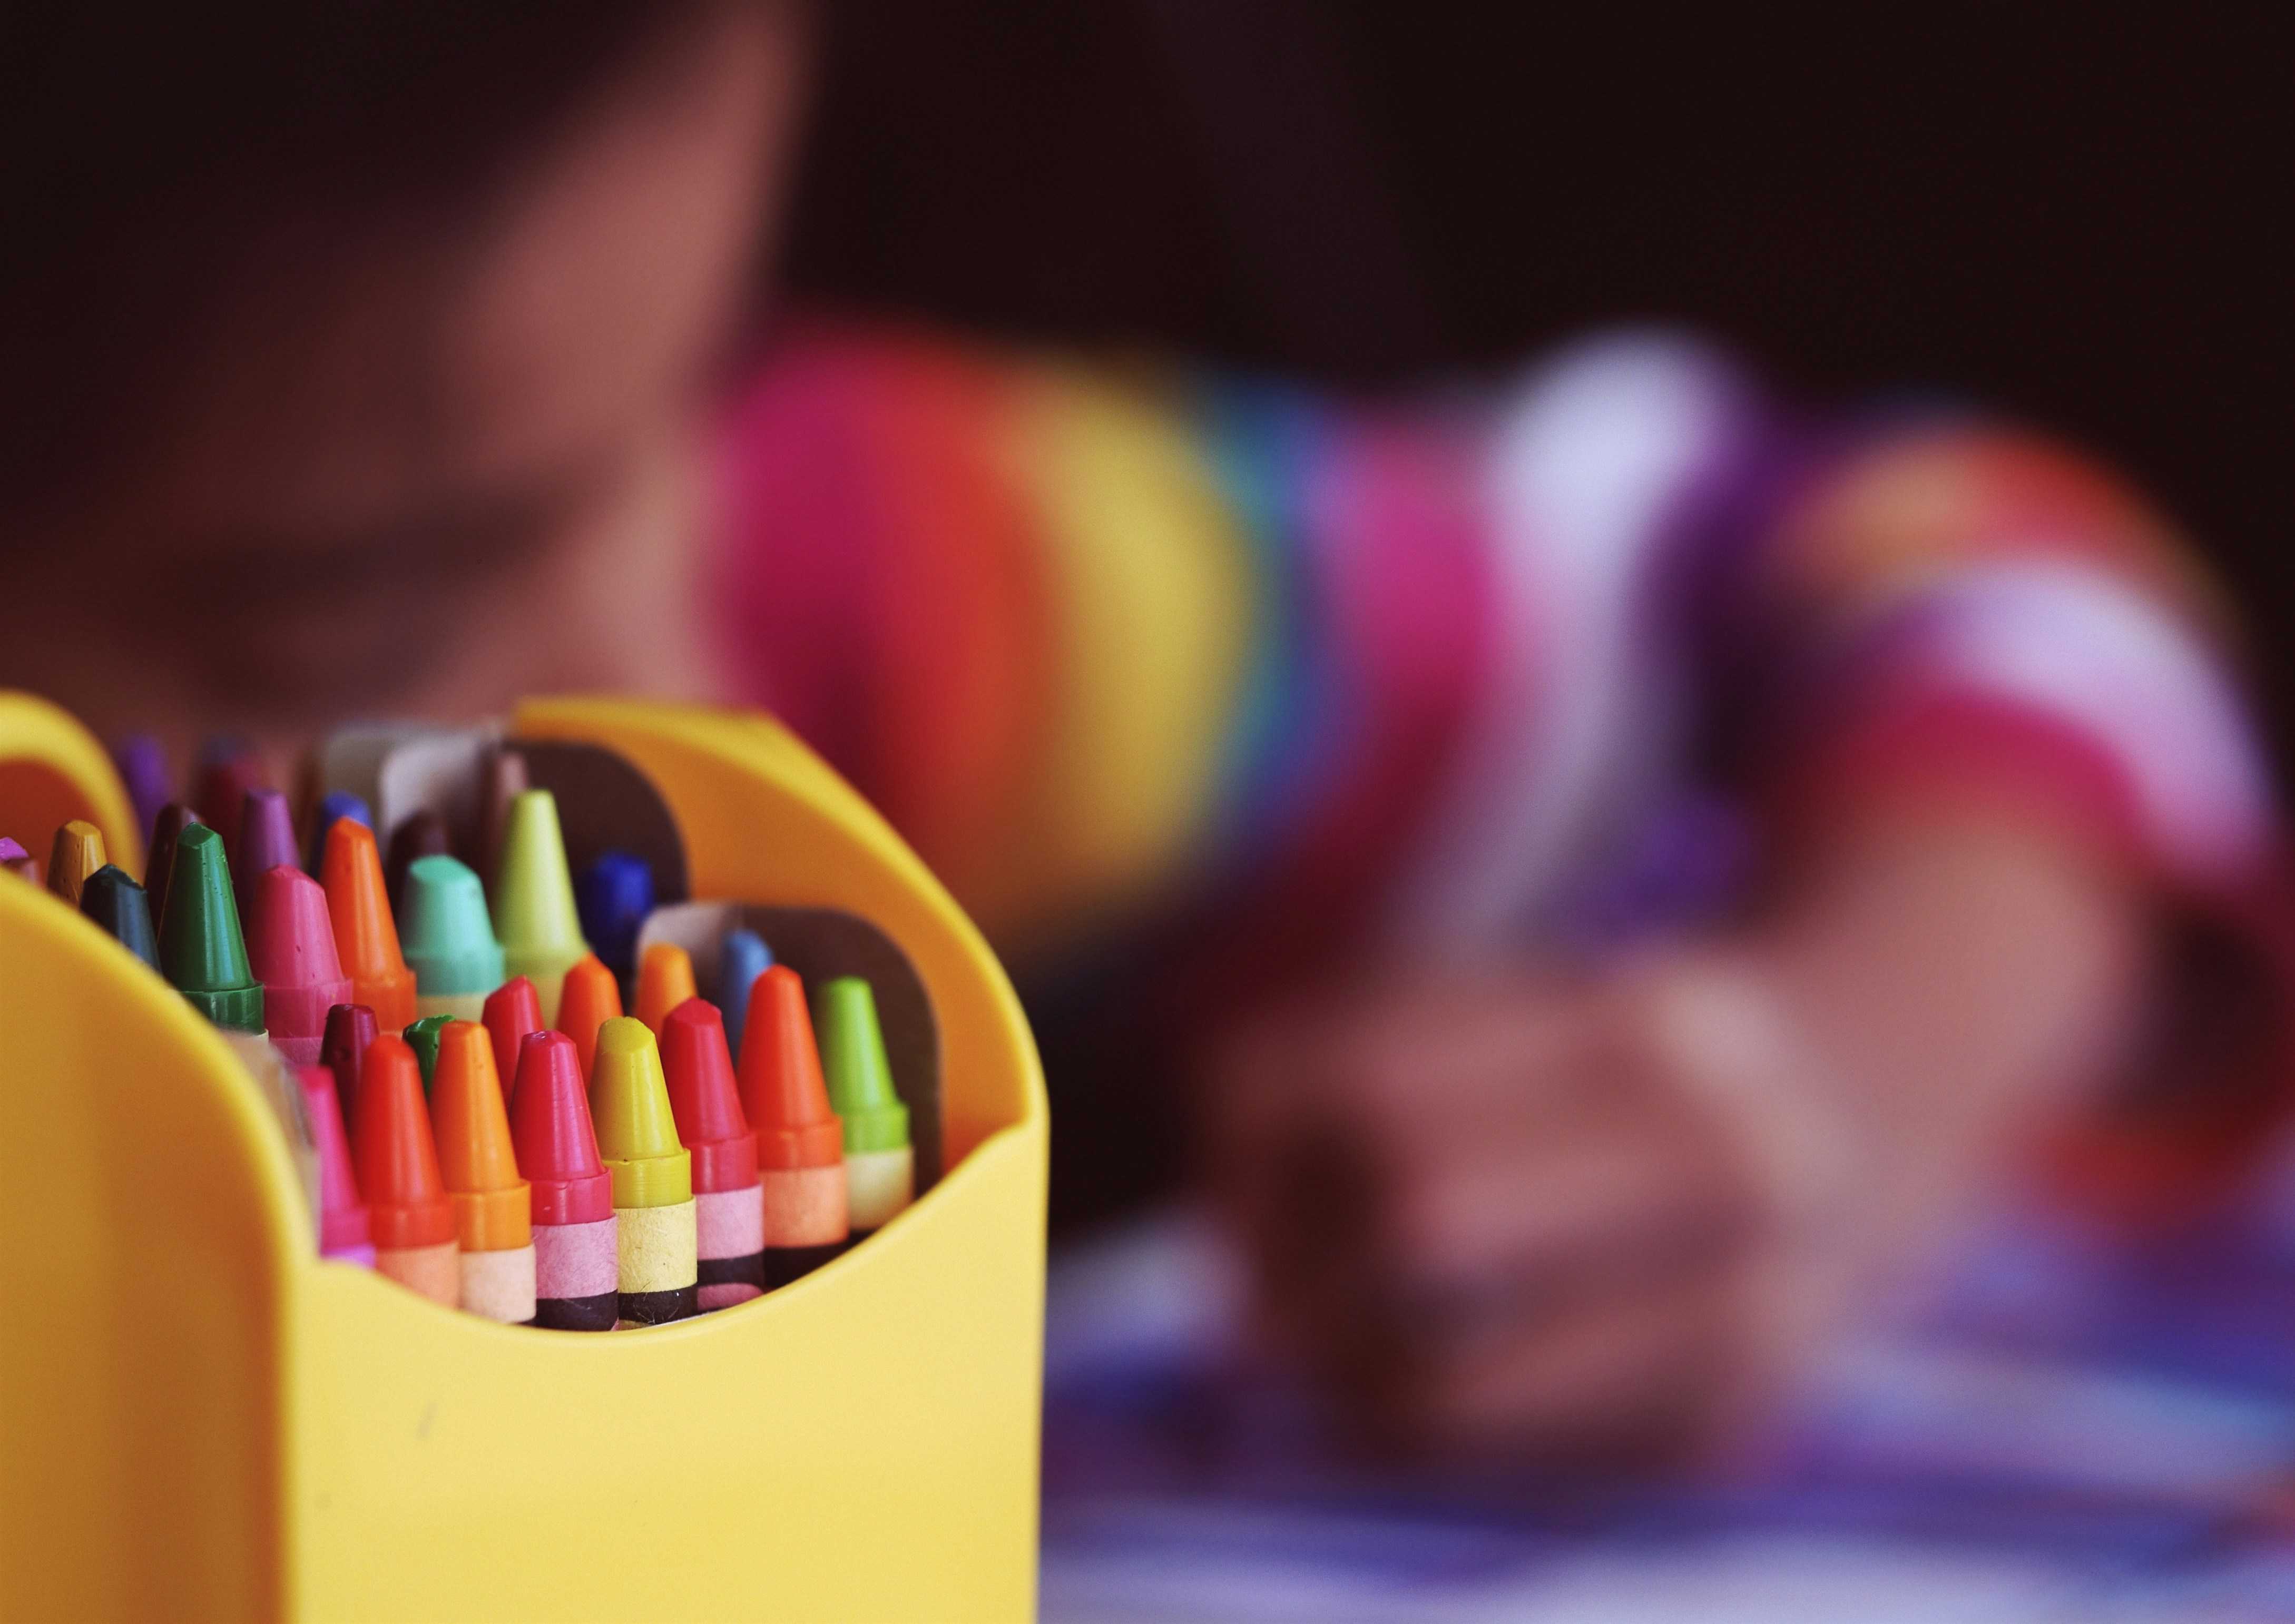 A child drawing with some colourful crayons. They are stored inside a yellow box.